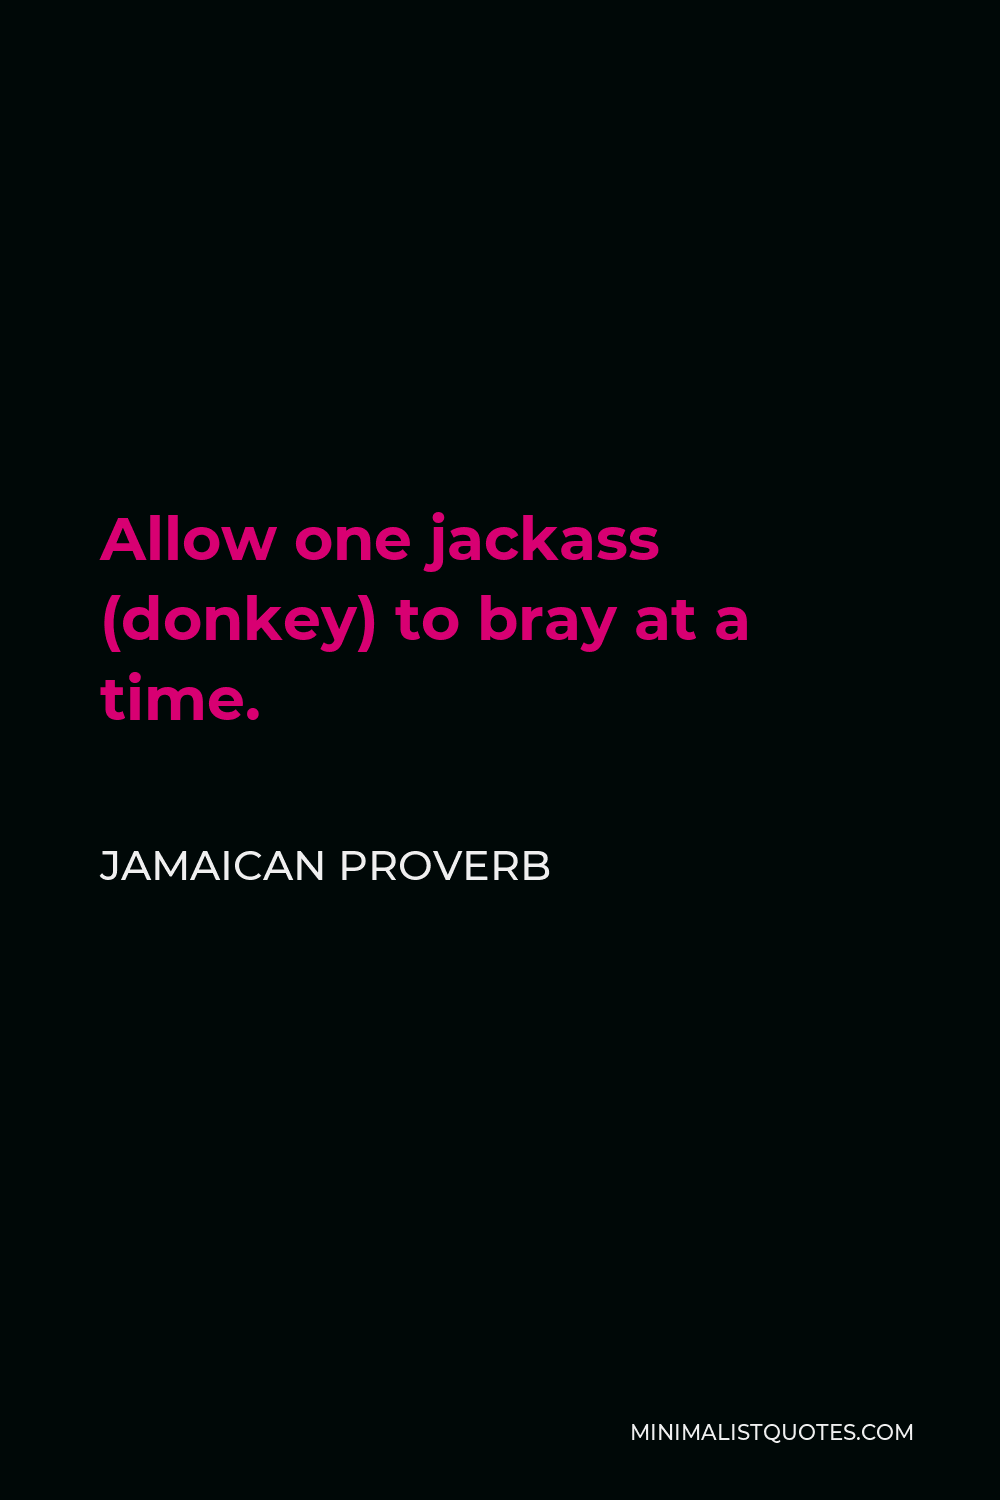 Jamaican Proverb Quote - Allow one jackass (donkey) to bray at a time.